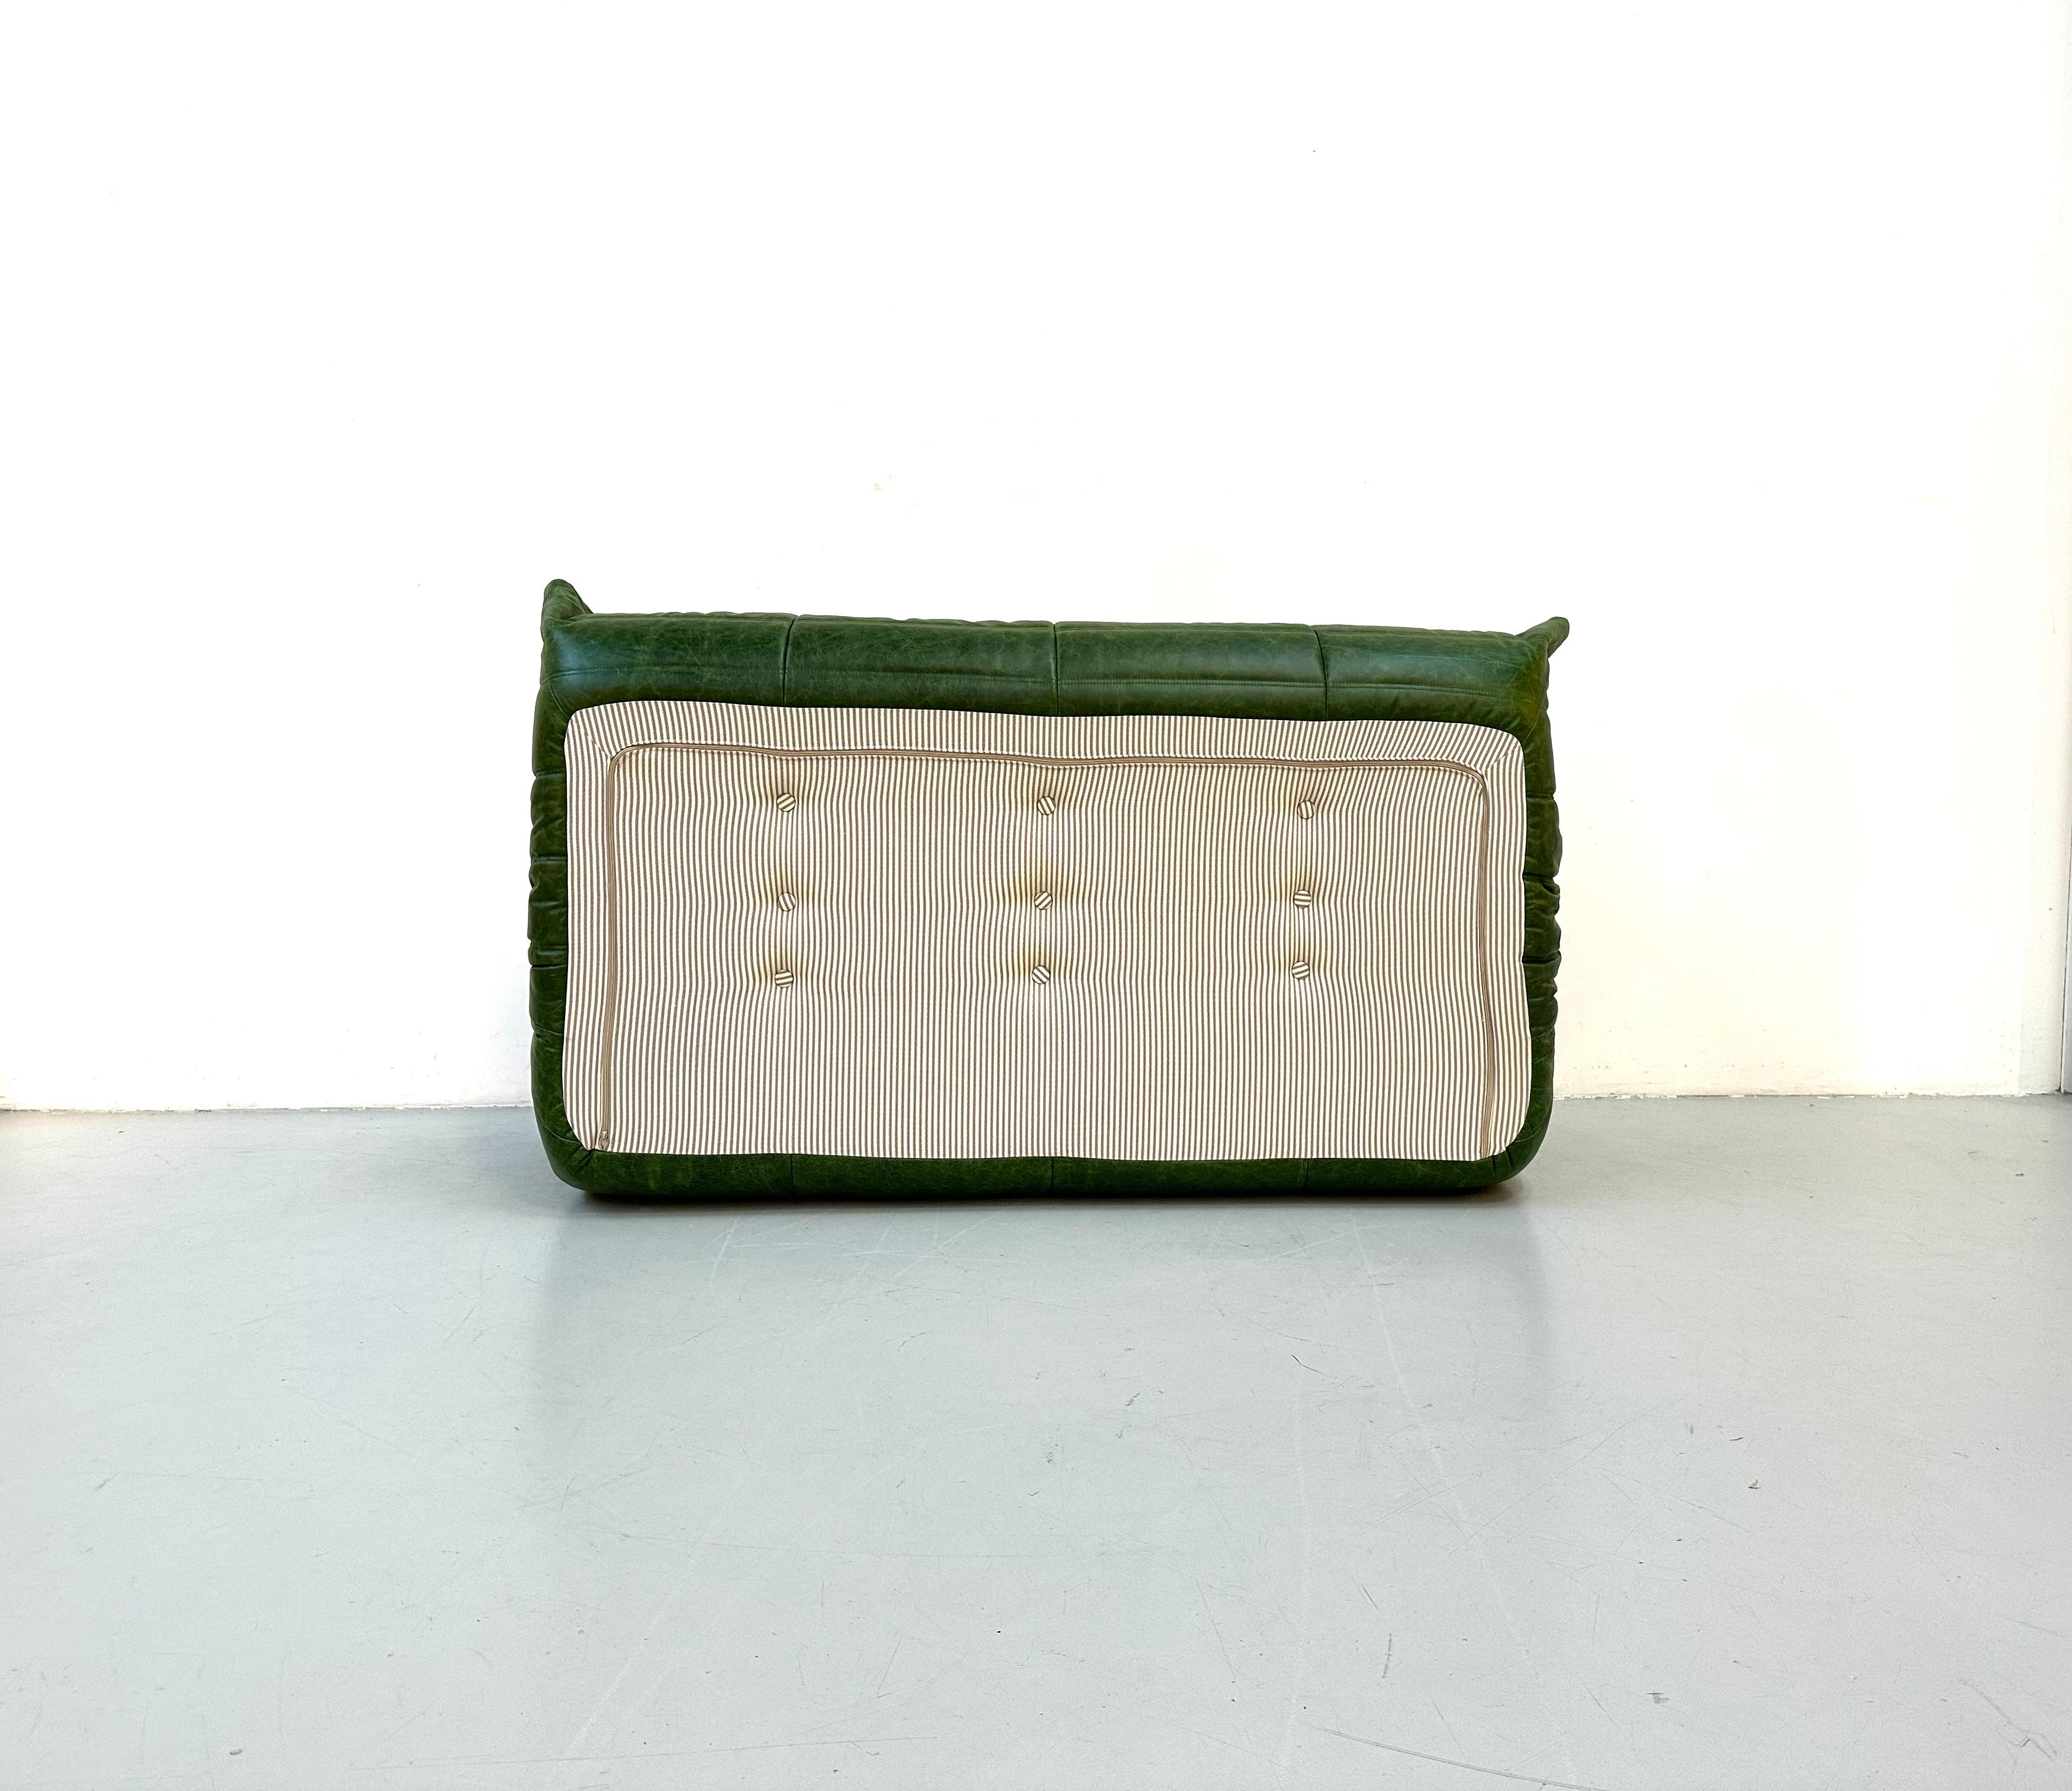 French Vintage Togo Sofa in Green  Leather by Michel Ducaroy for Ligne Roset. 7